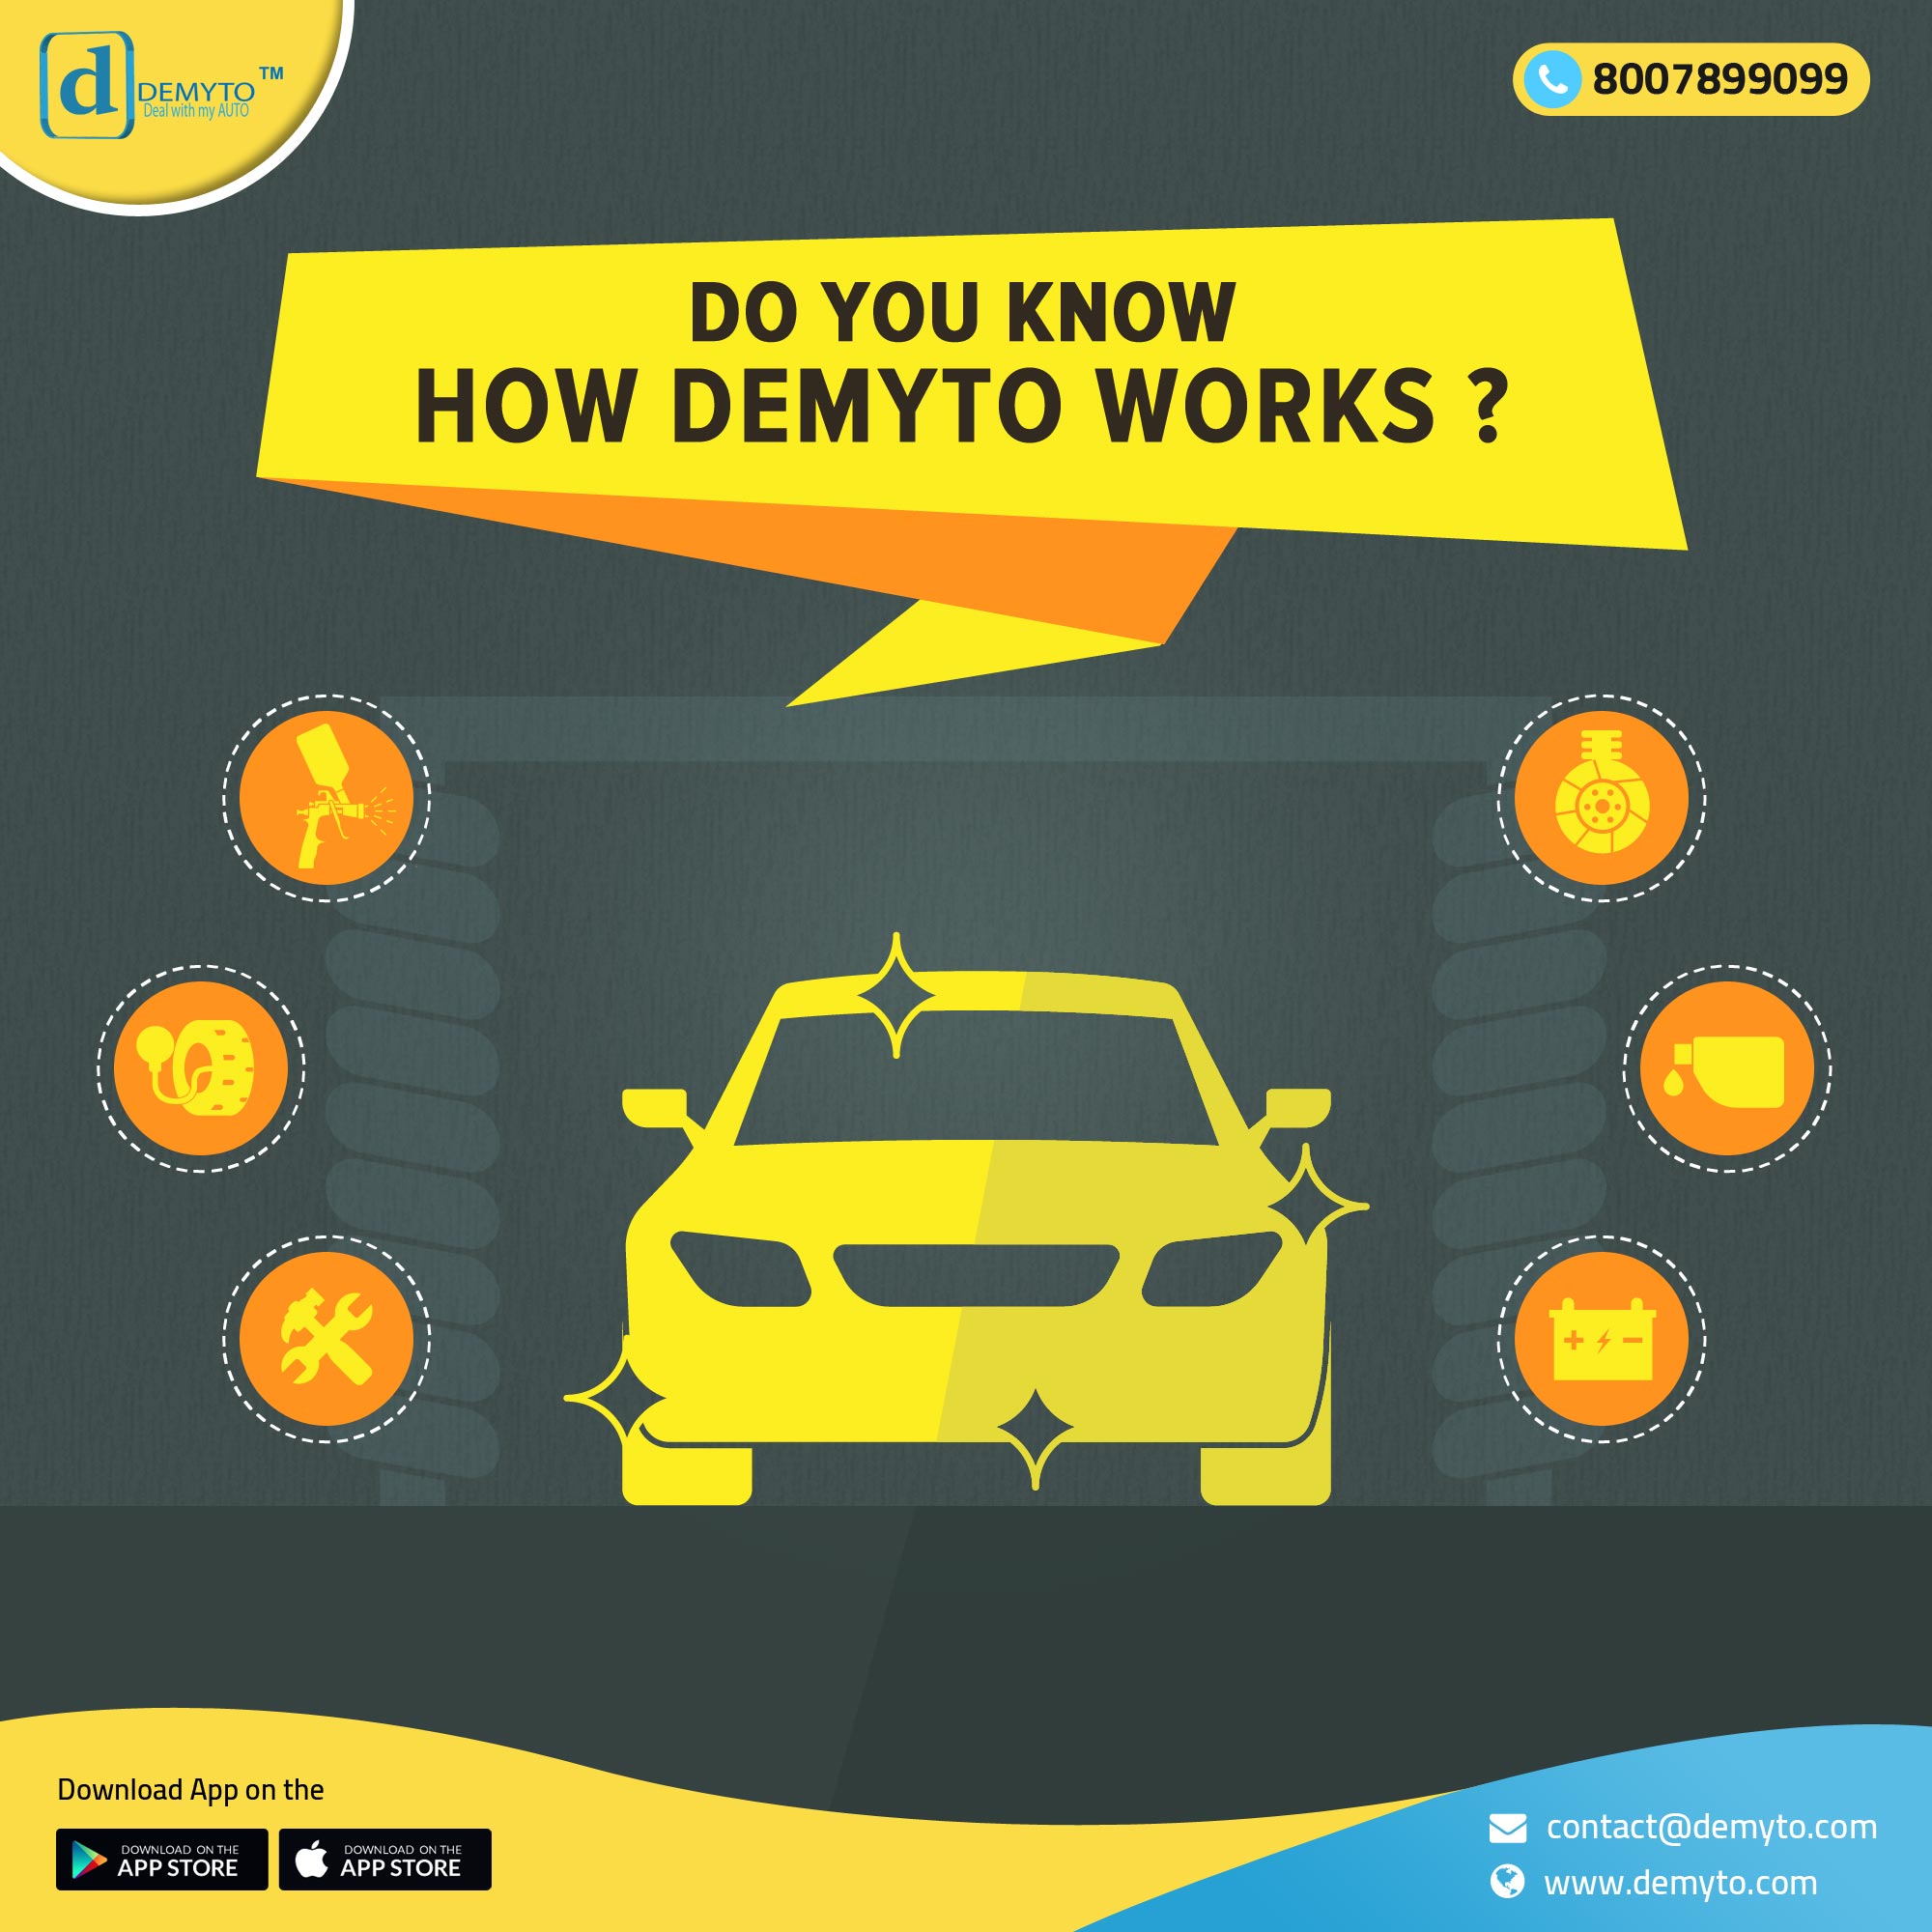 How does DEMYTO work?